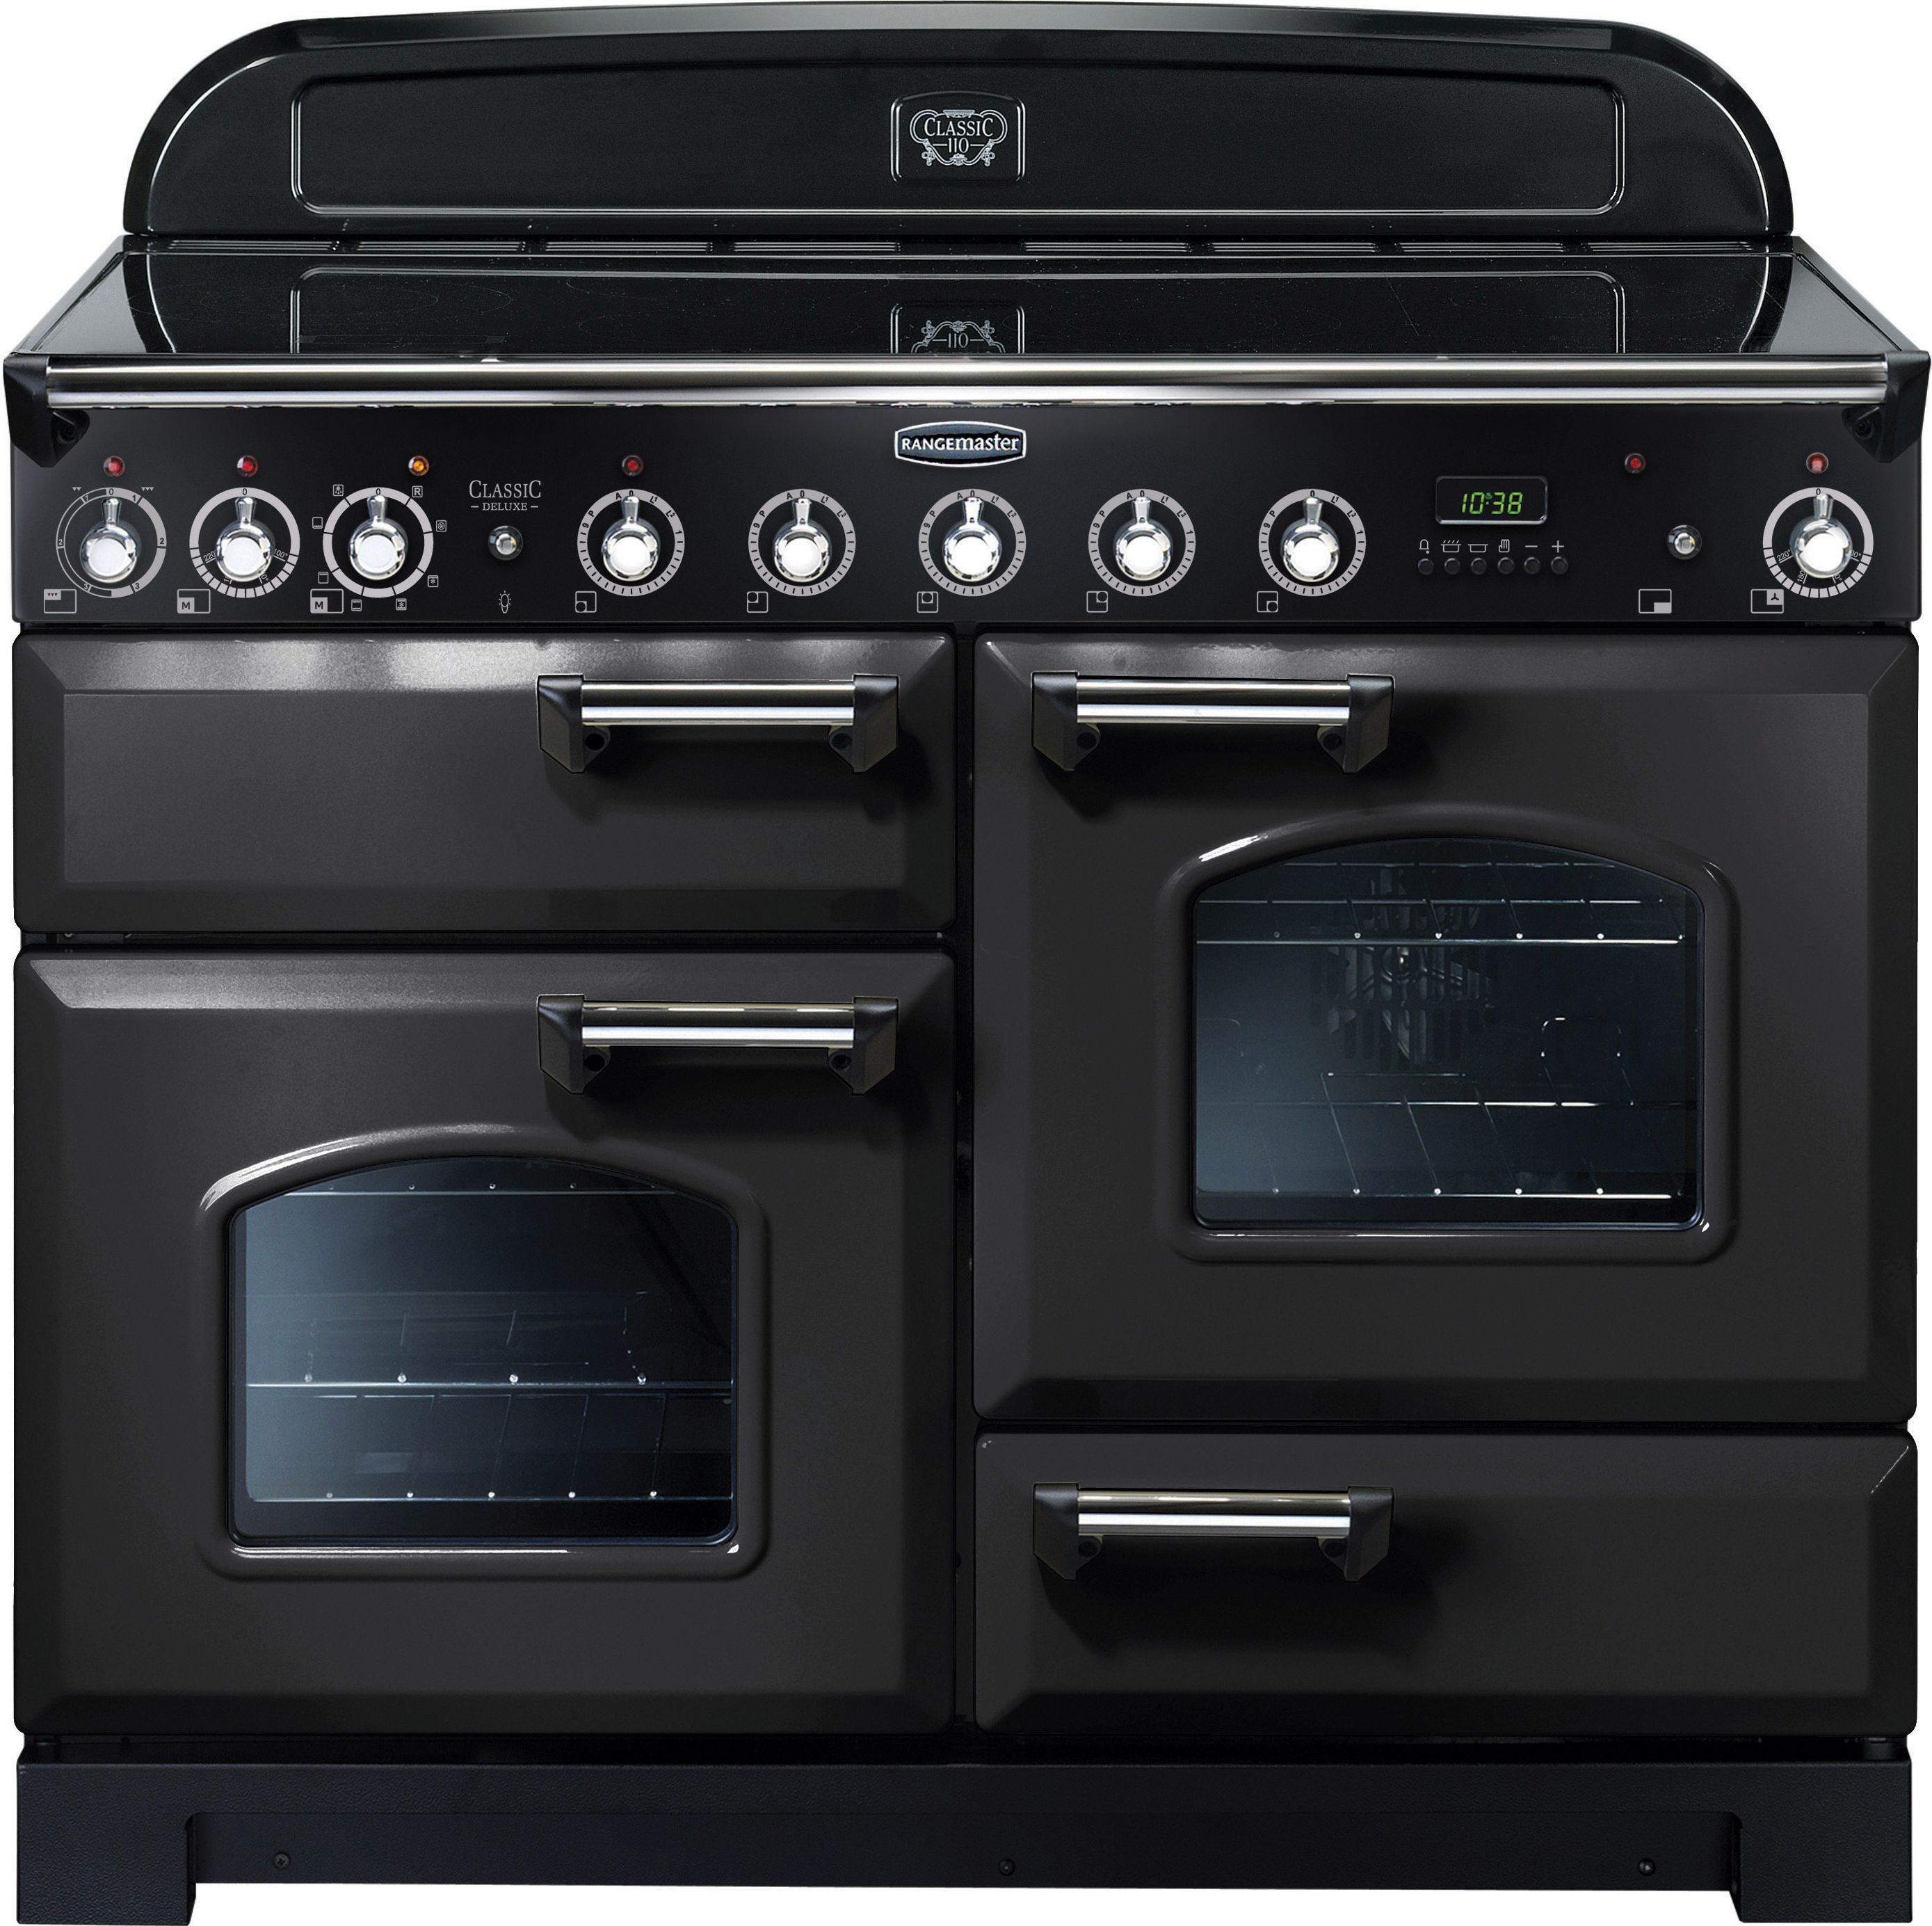 Rangemaster Classic Deluxe CDL110EICB/C 110cm Electric Range Cooker with Induction Hob - Charcoal Black / Chrome - A/A Rated, Black